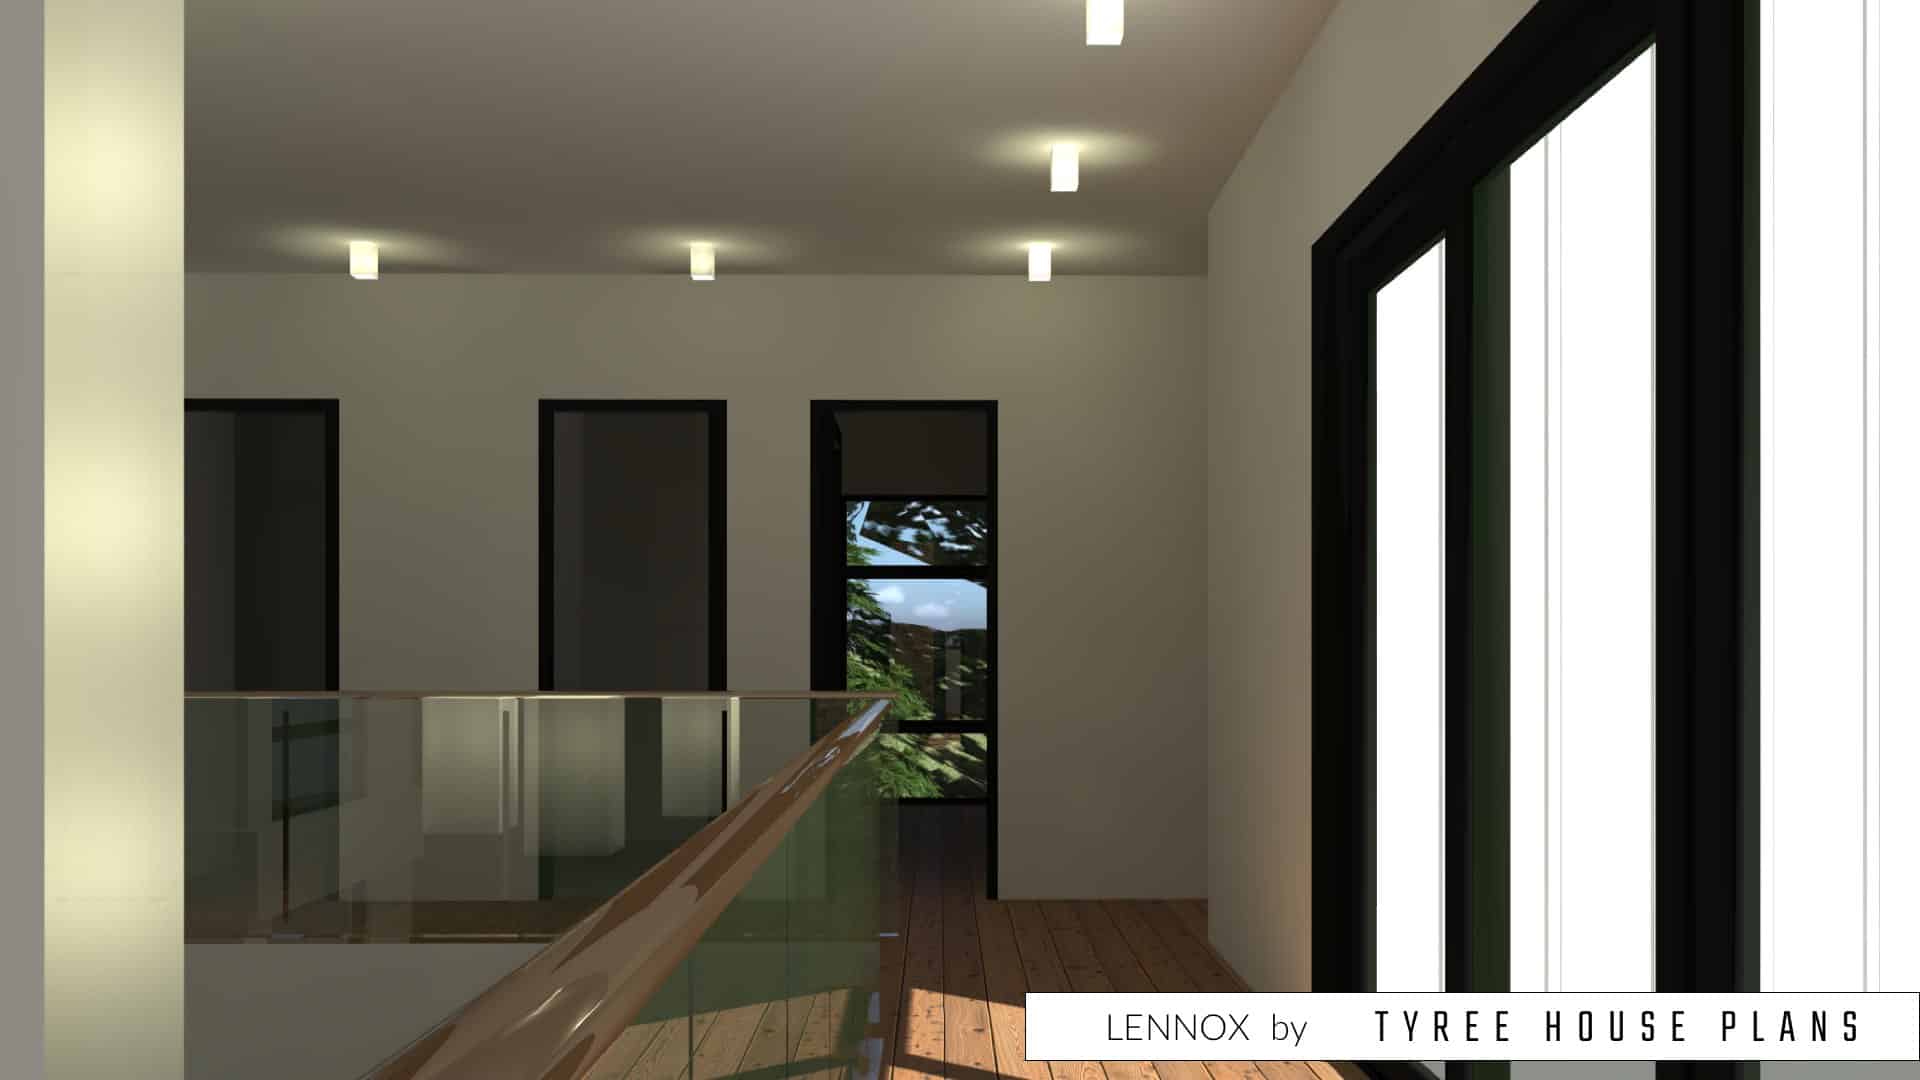 Upstairs hallway. Lennox by Tyree House Plans